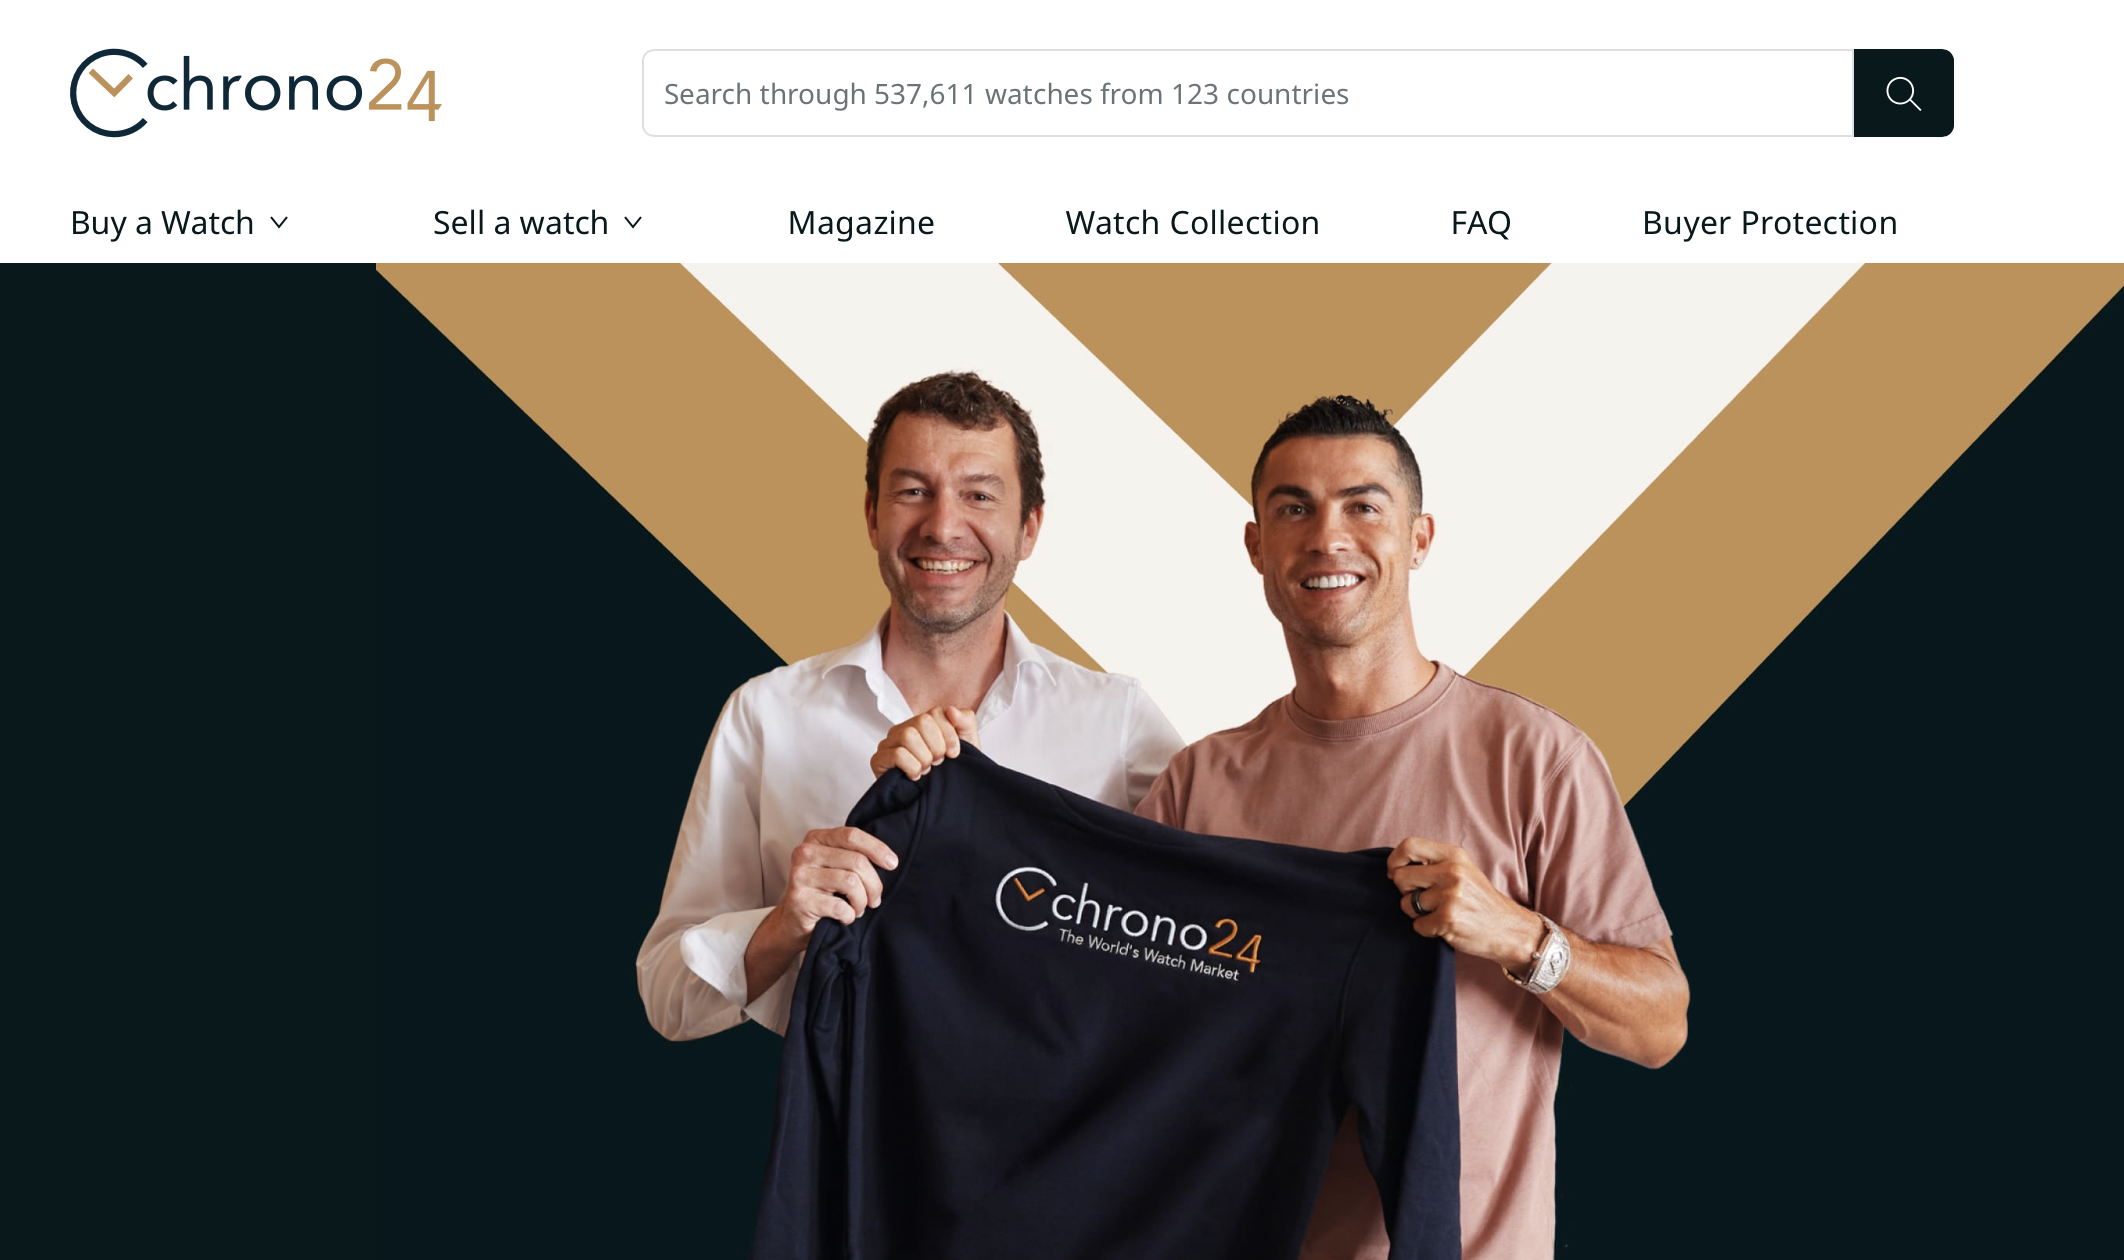 Cristiano Ronaldo Invests in Chrono24, the World’s Largest Luxury Watch E-commerce Platform